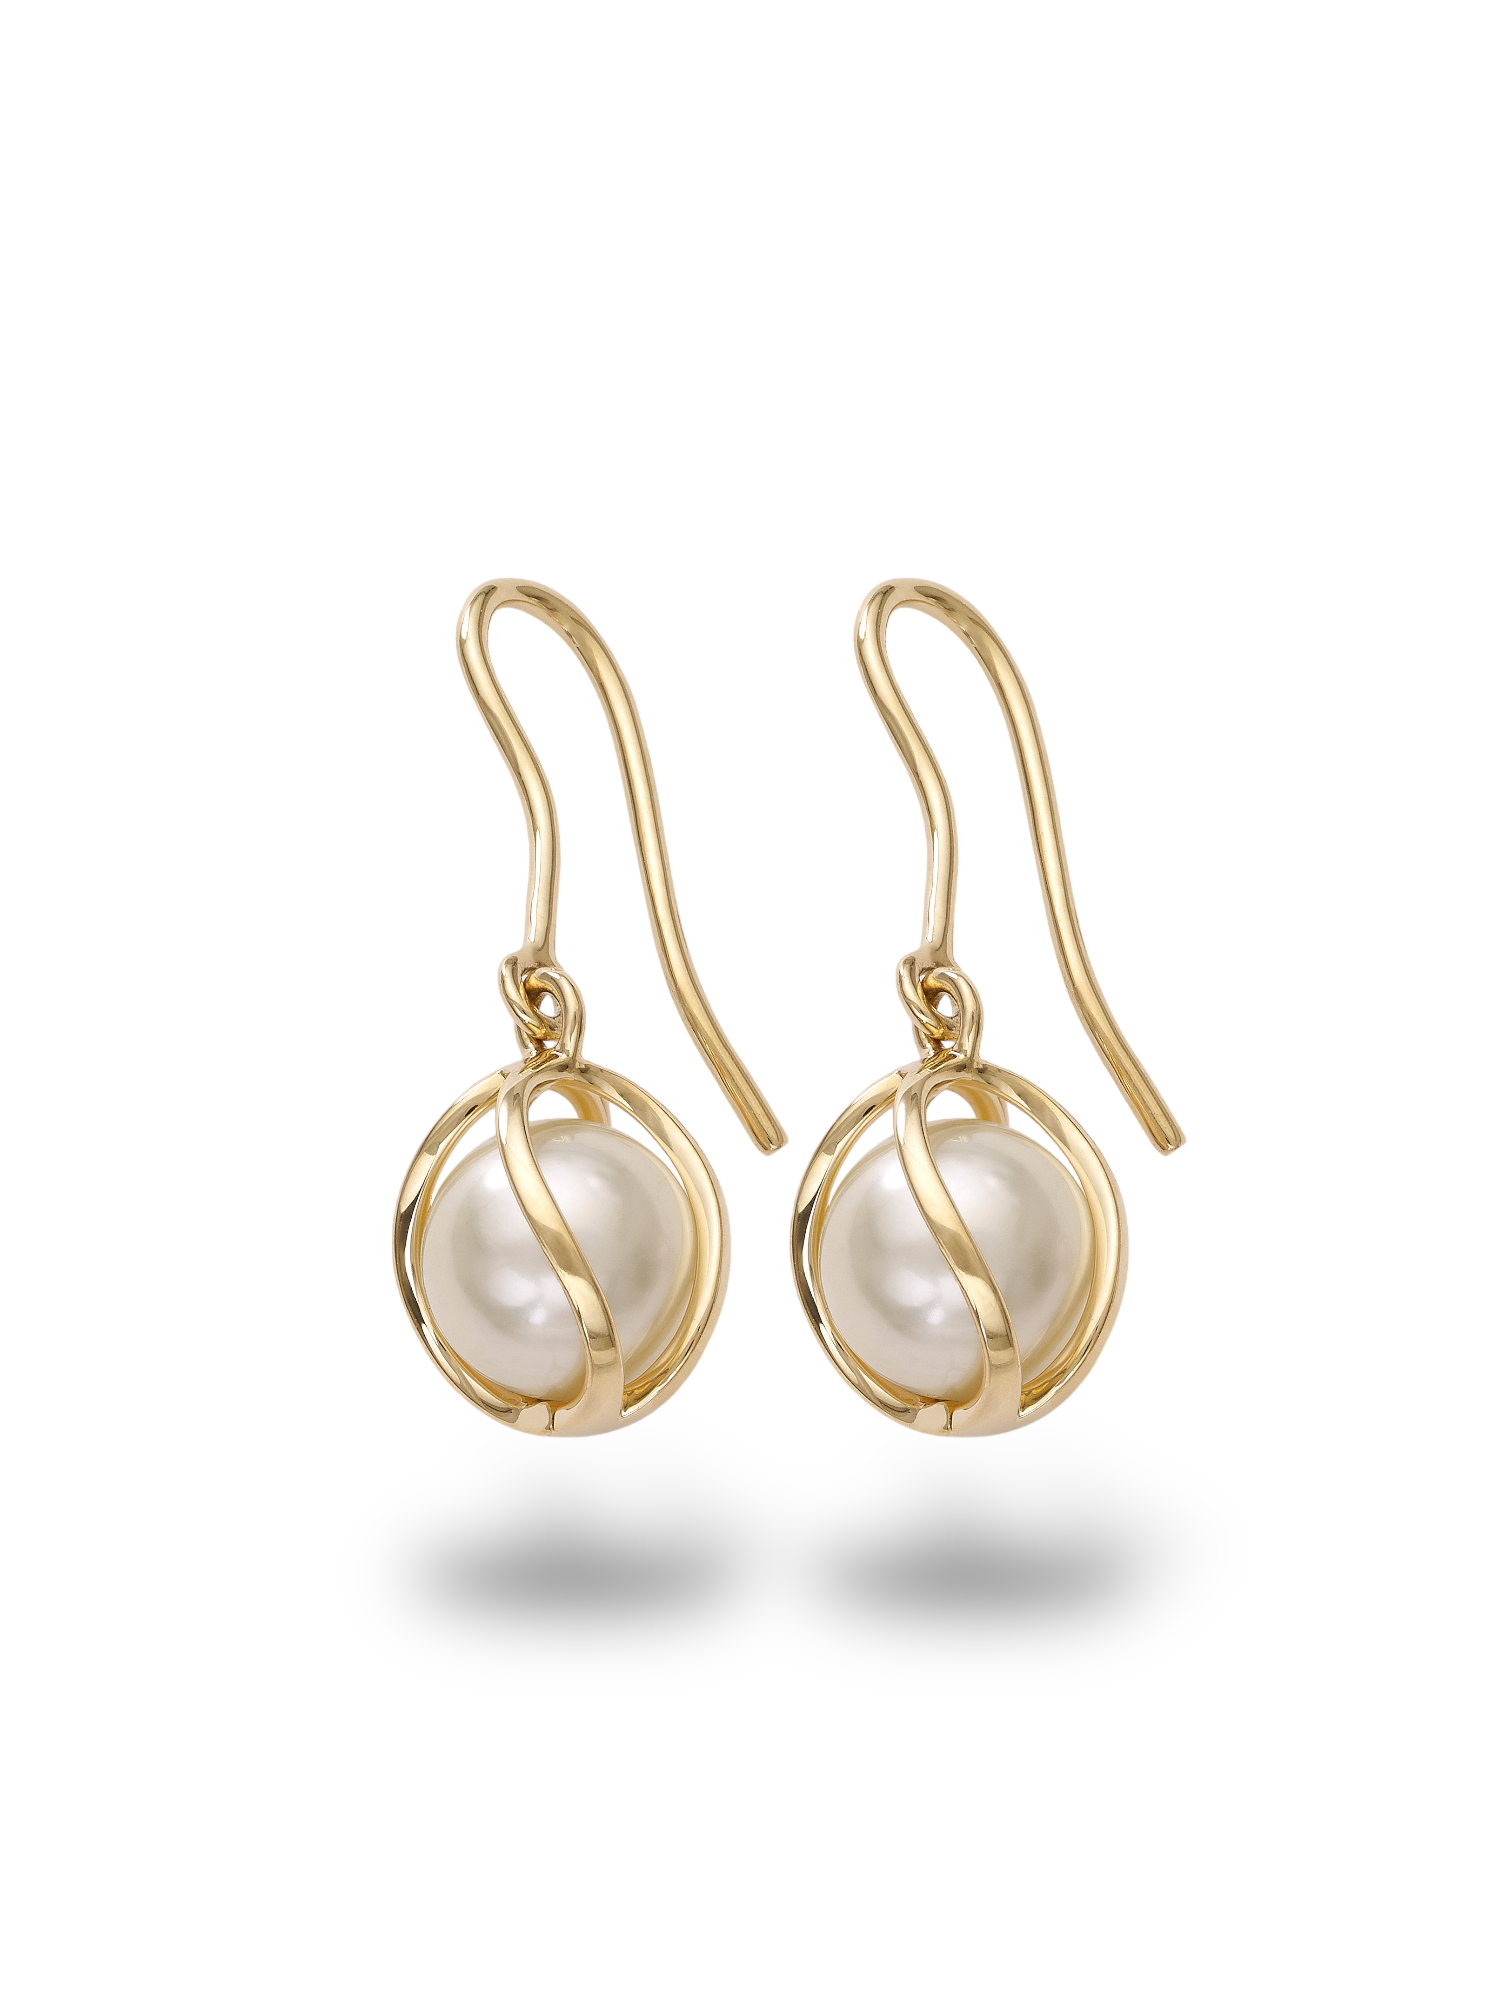 The Suspension Earrings - Pearl / Yellow Gold Devam